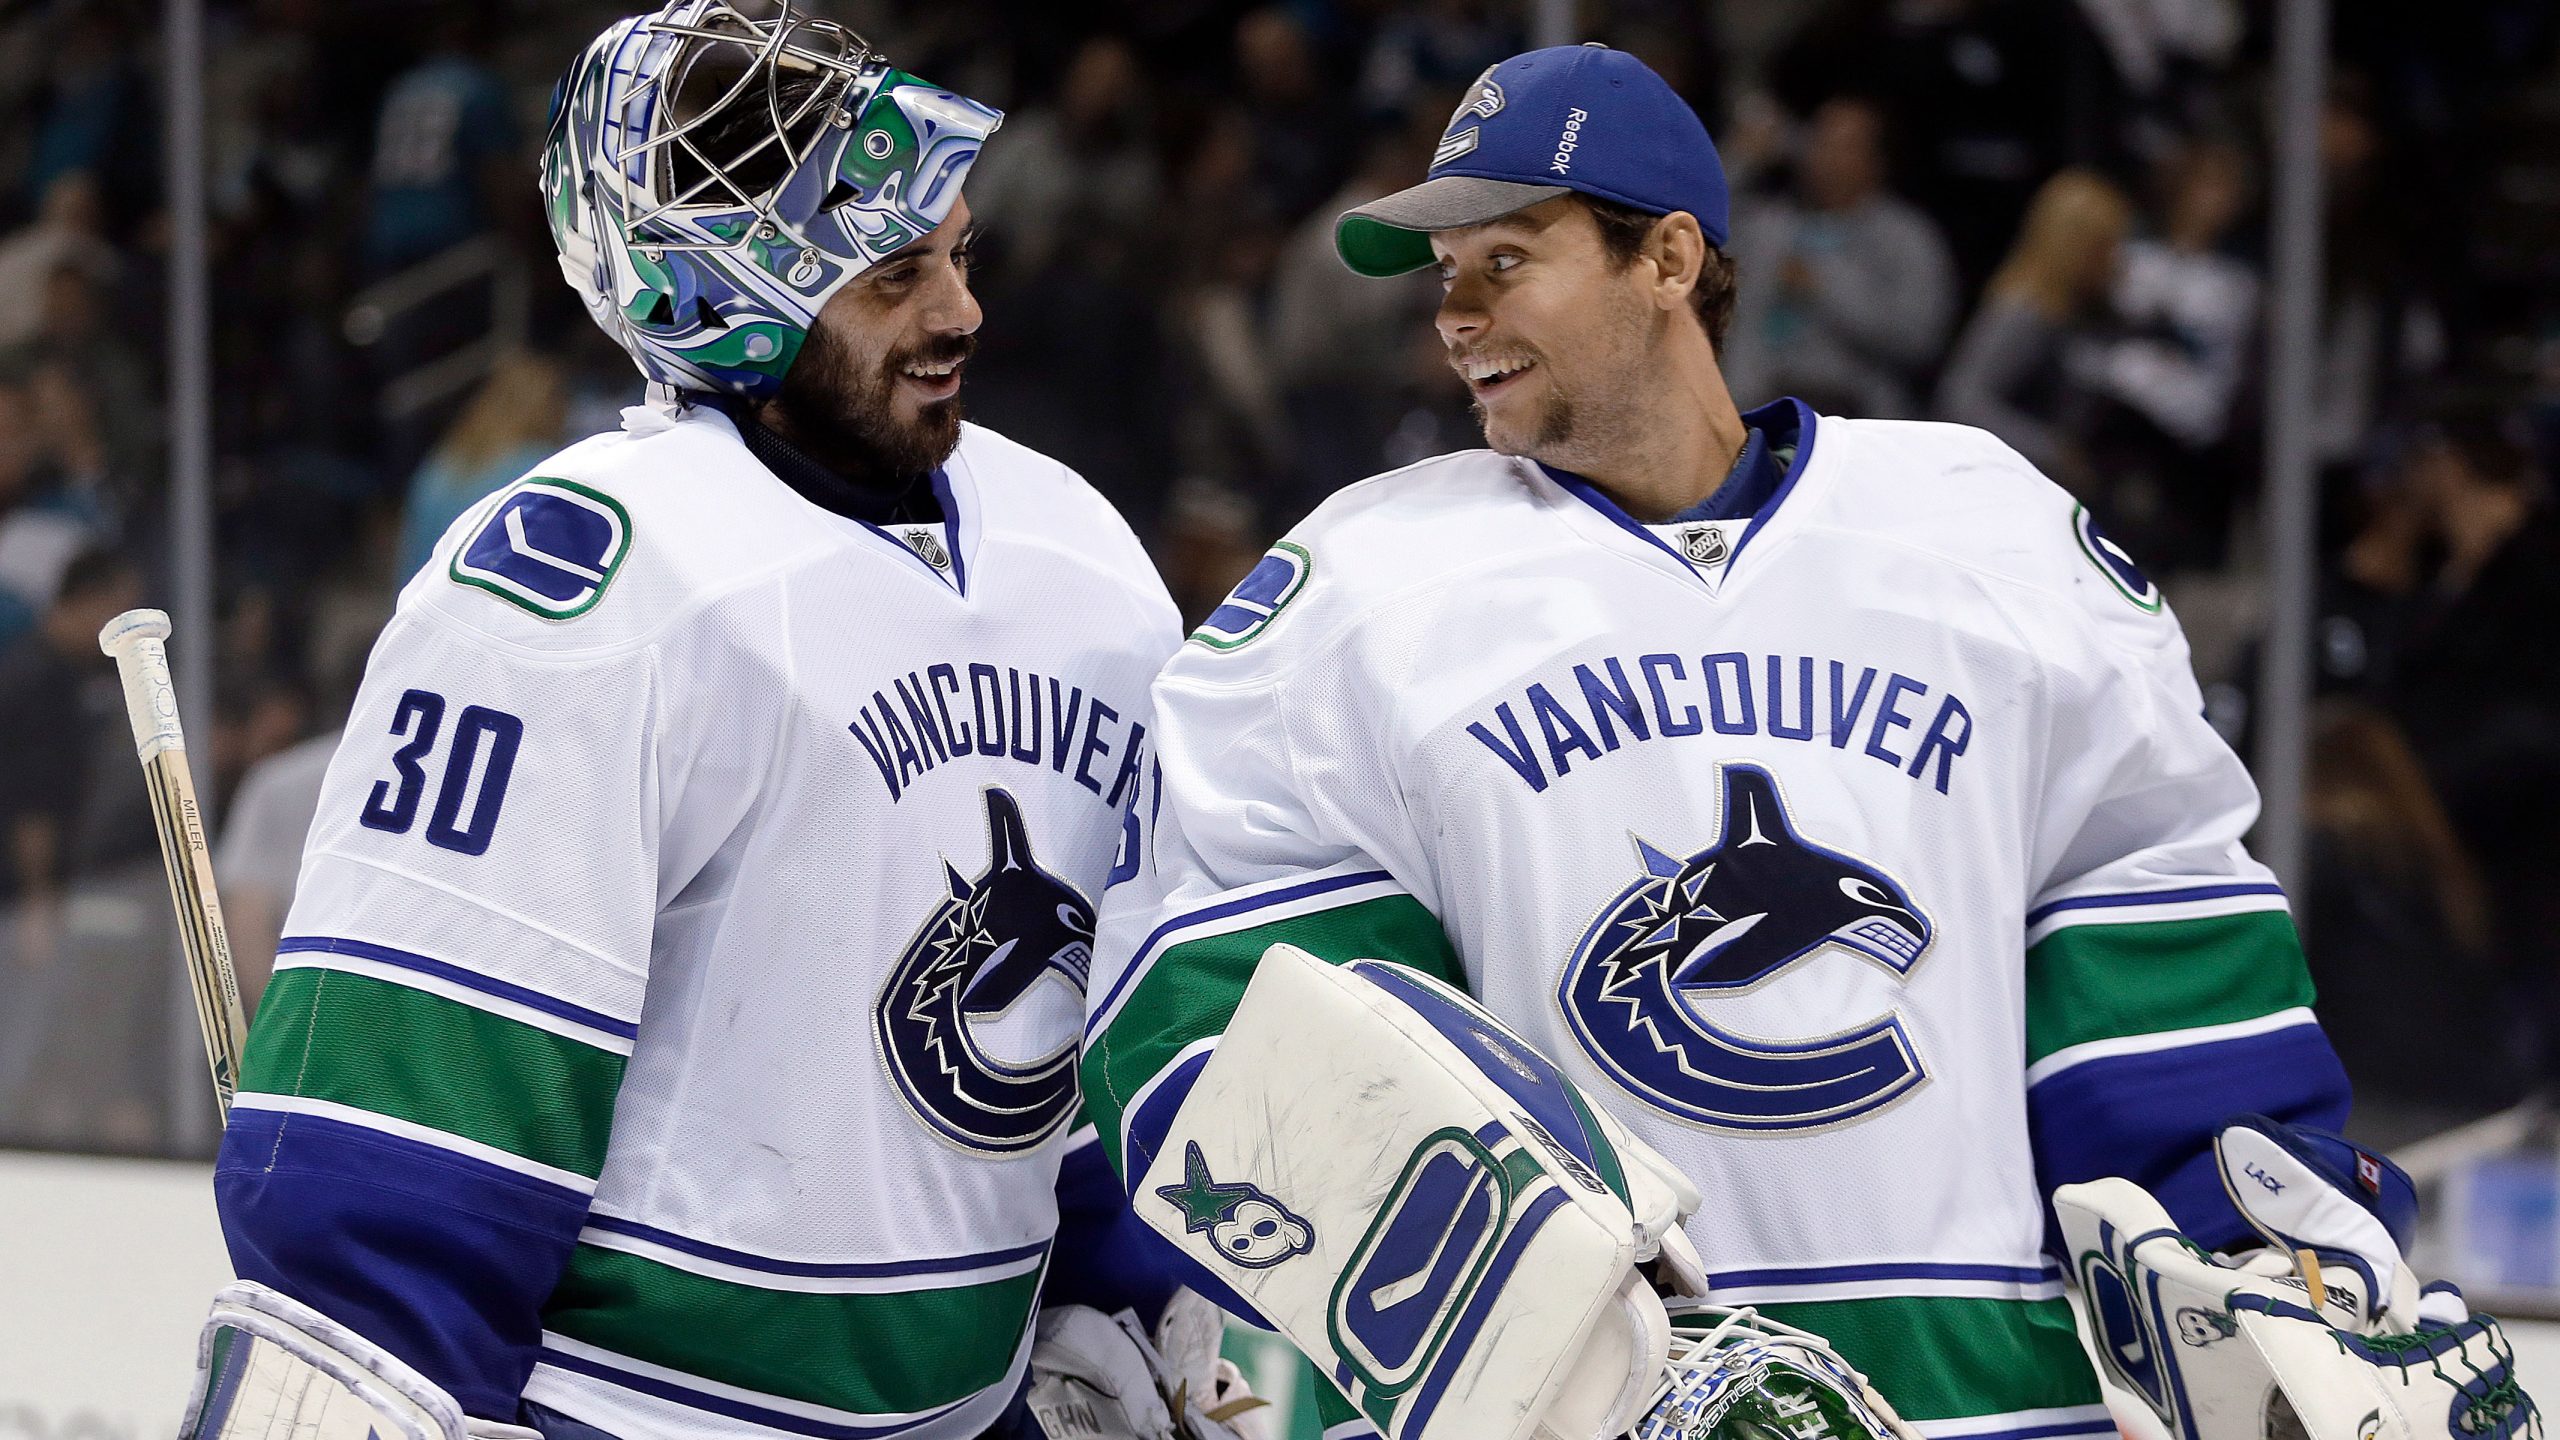 Vancouver Canucks Division Preview: San Jose Sharks